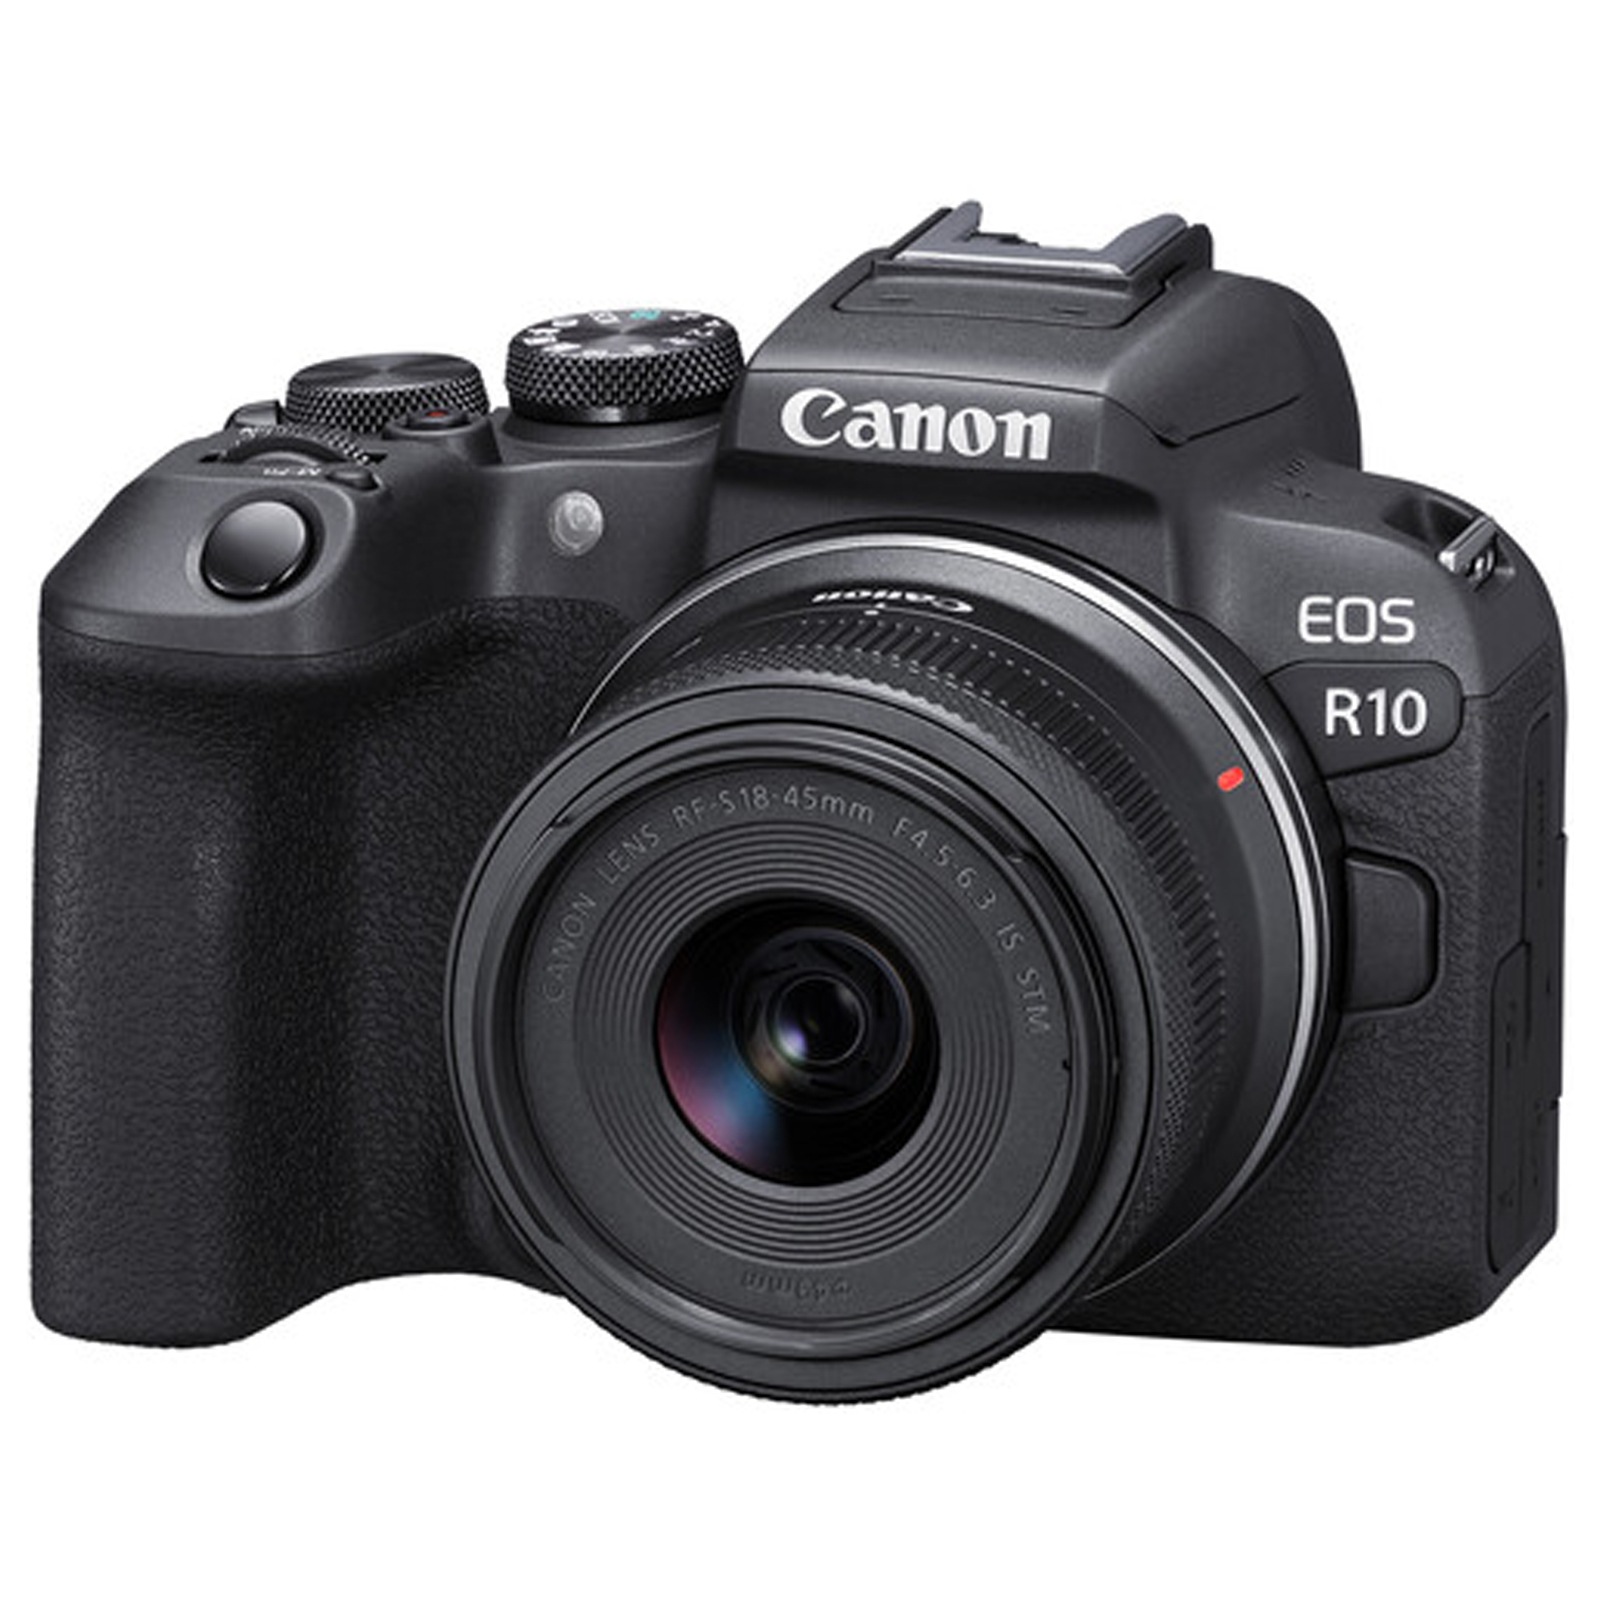 Image of Canon EOS R10 Digital Camera with 1845mm Lens